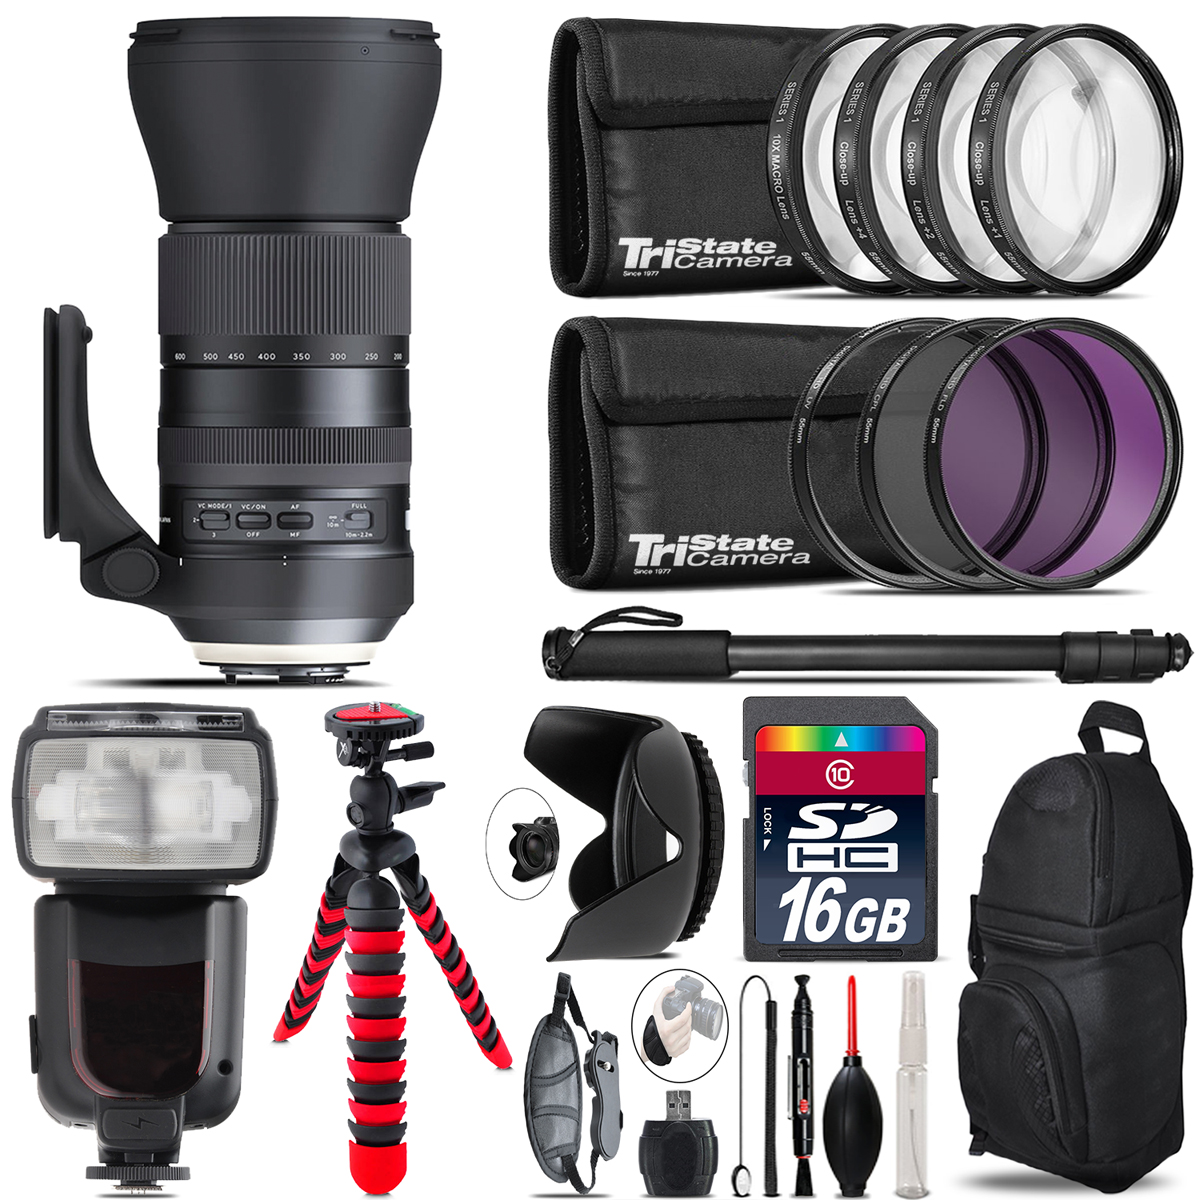 Tamron 150-600mm G2 for Nikon + Professional Flash & More - 16GB Accessory Kit *FREE SHIPPING*